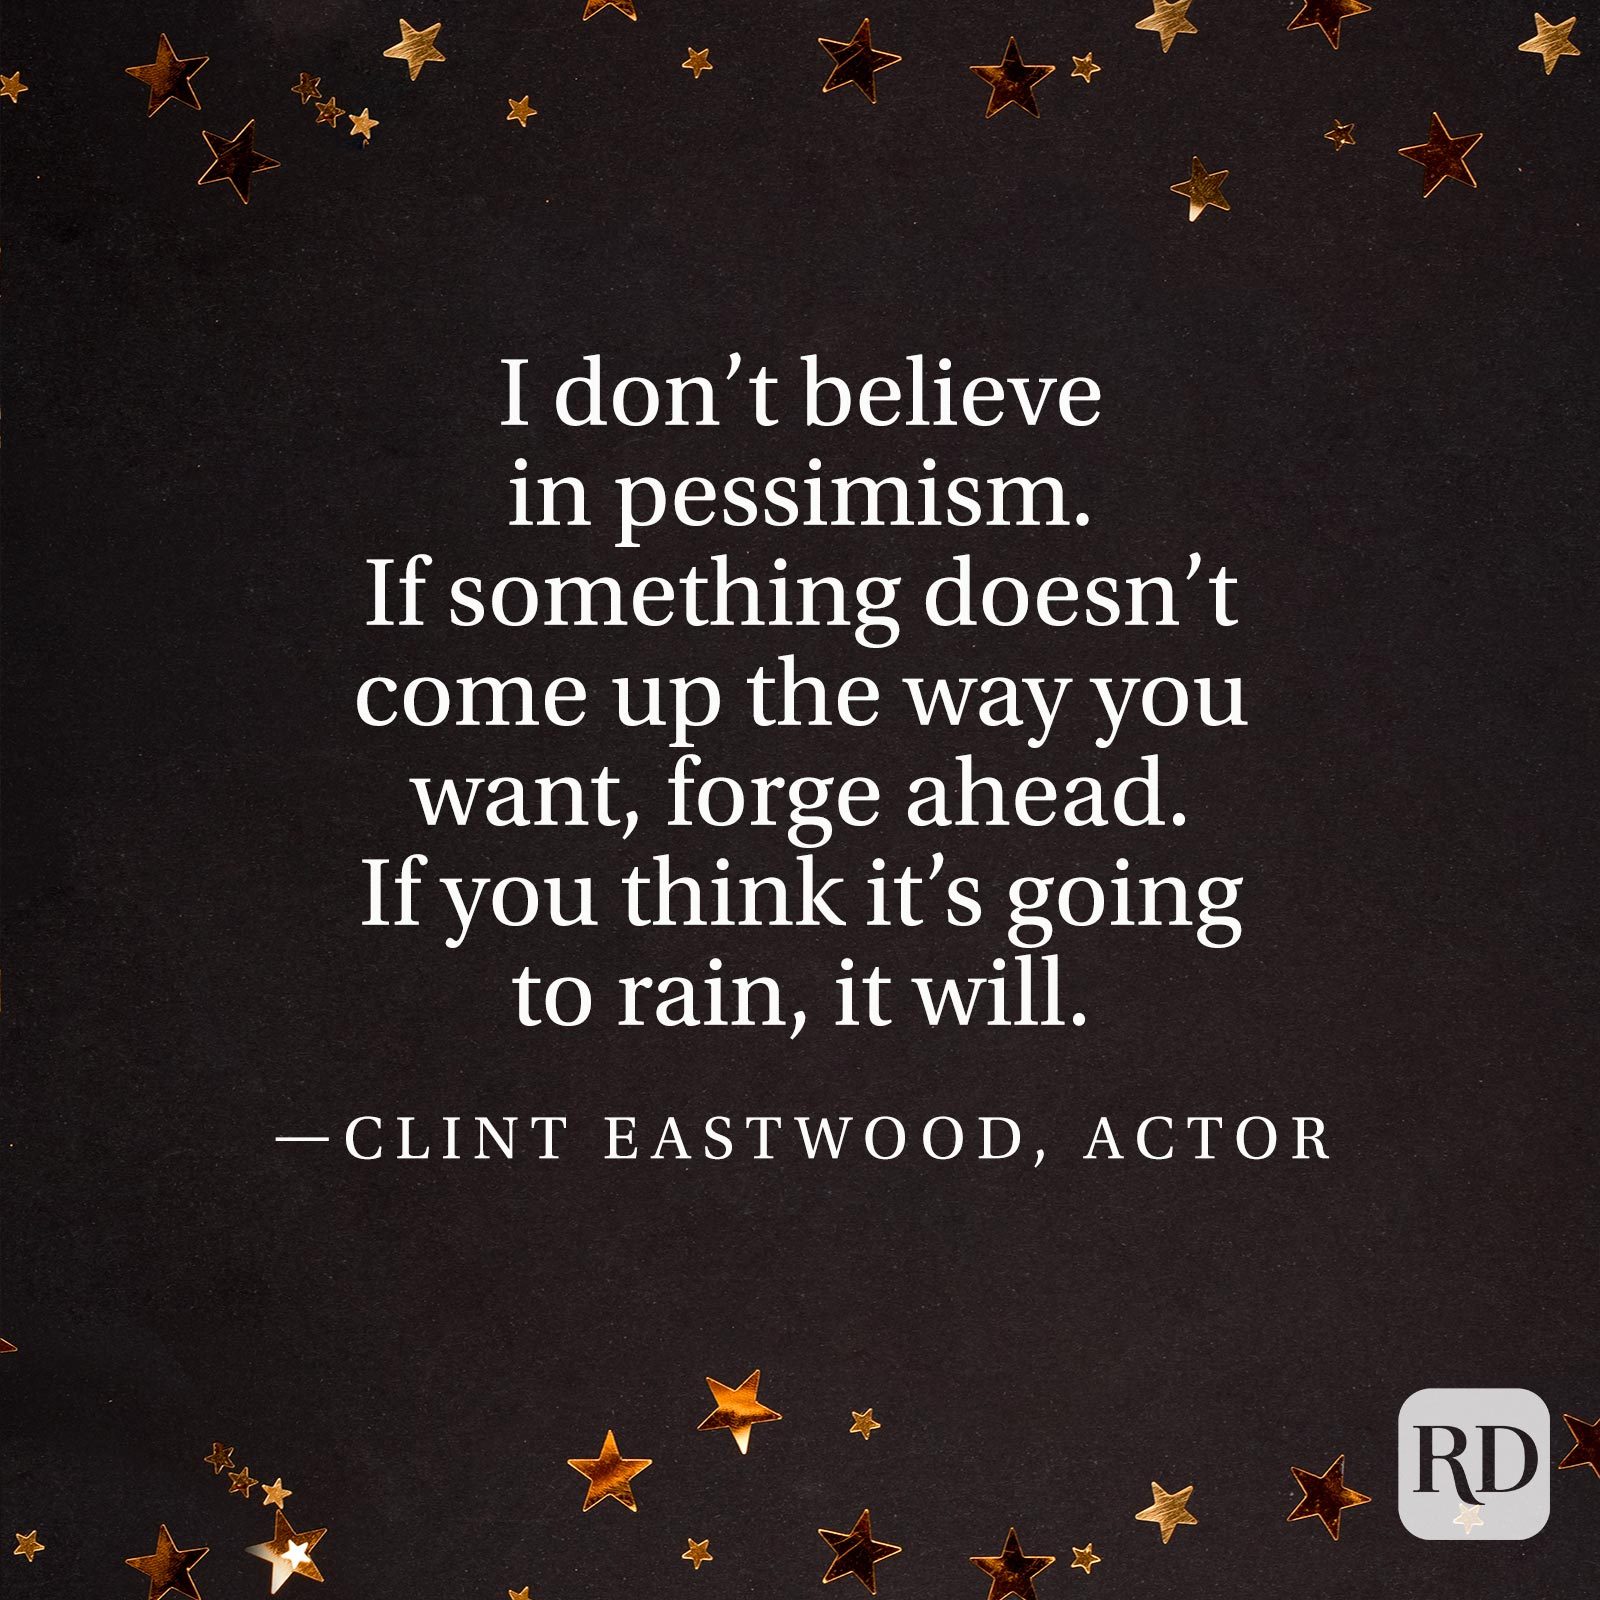 "I don't believe in pessimism. If something doesn't come up the way you want, forge ahead. If you think it's going to rain, it will." —Clint Eastwood, actor